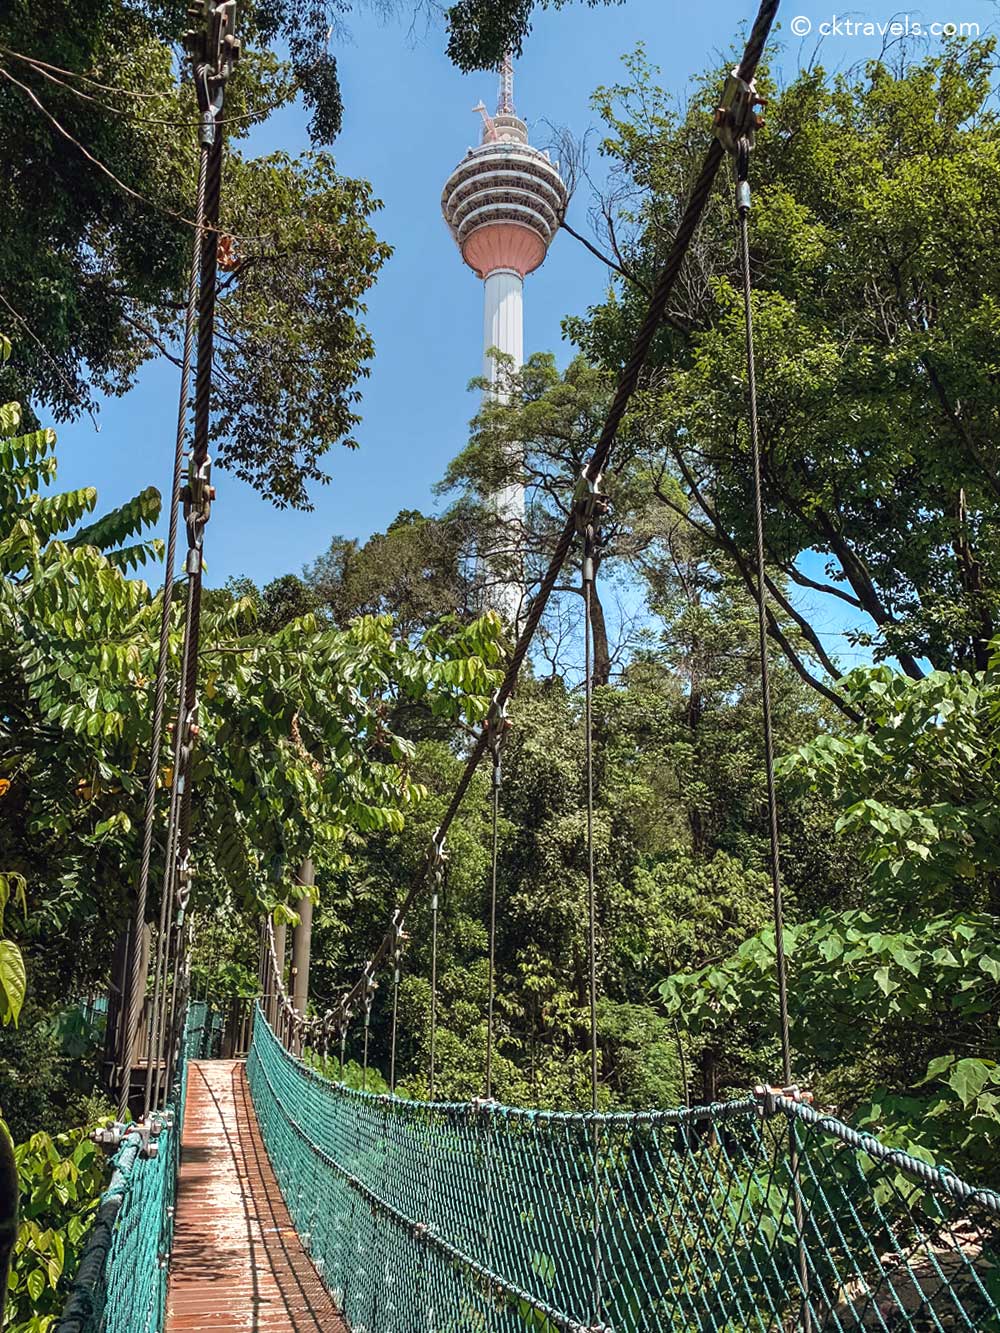 KL Eco Forest Park and KL Tower in Kuala Lumpur